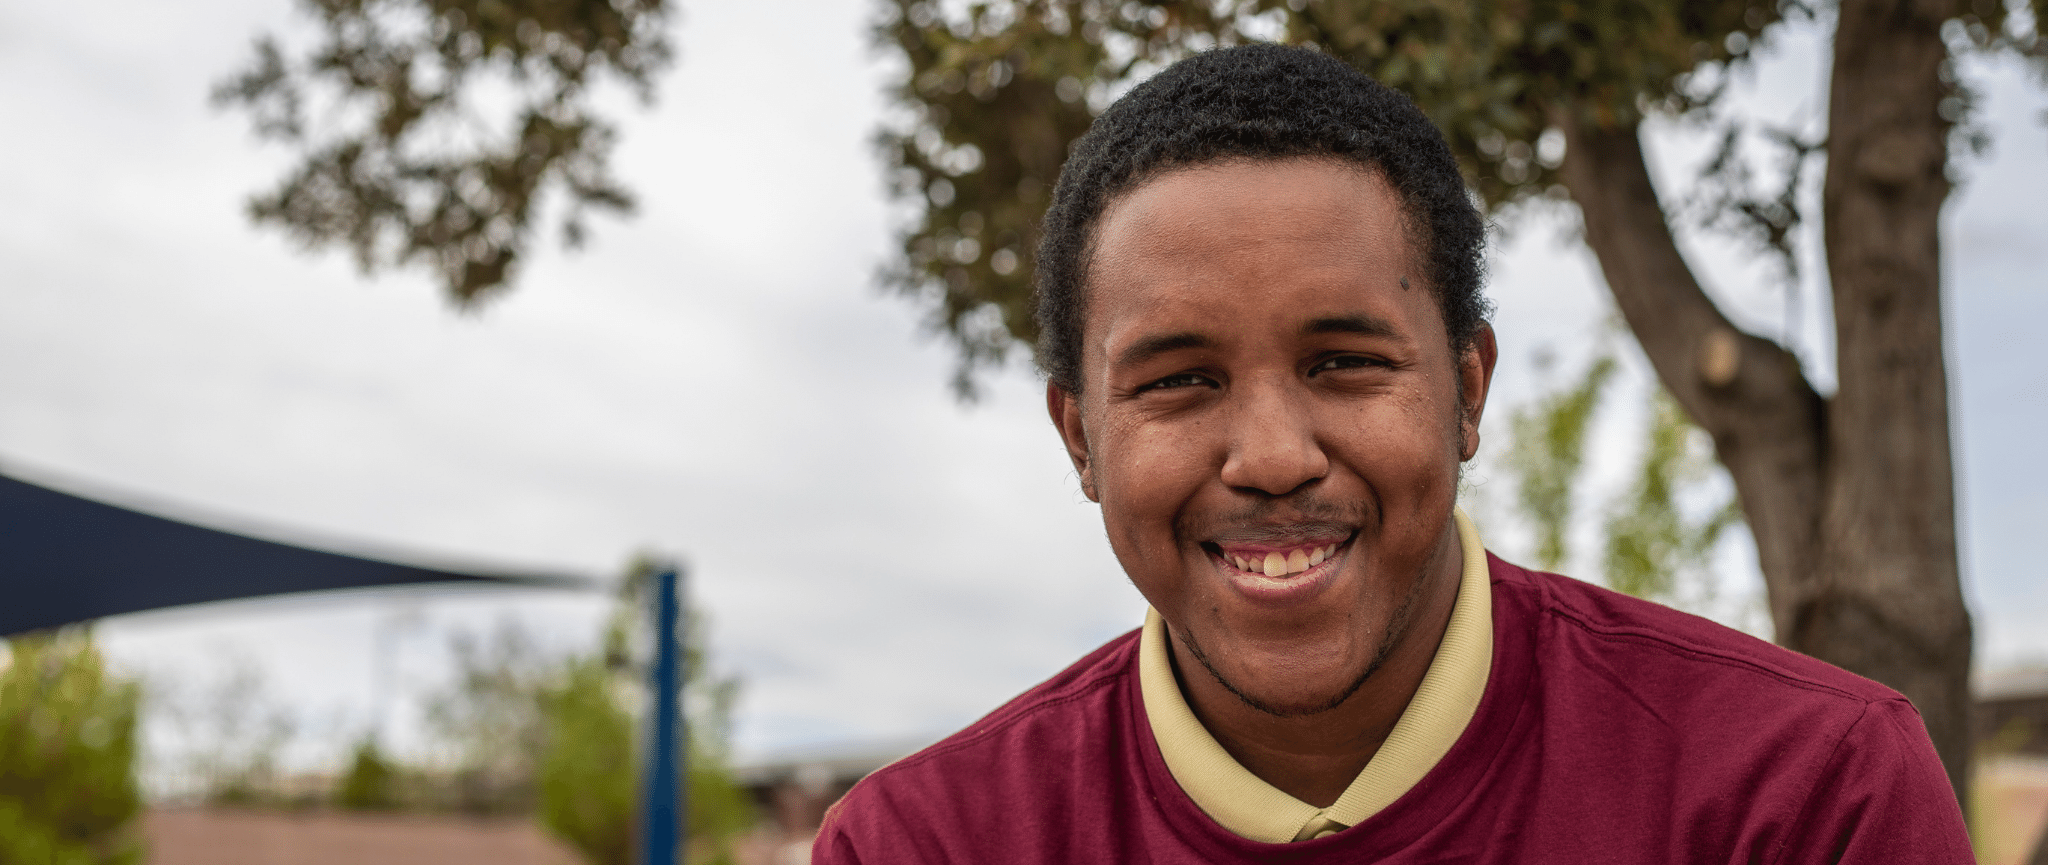 Young black person living with a developmental disability smiling